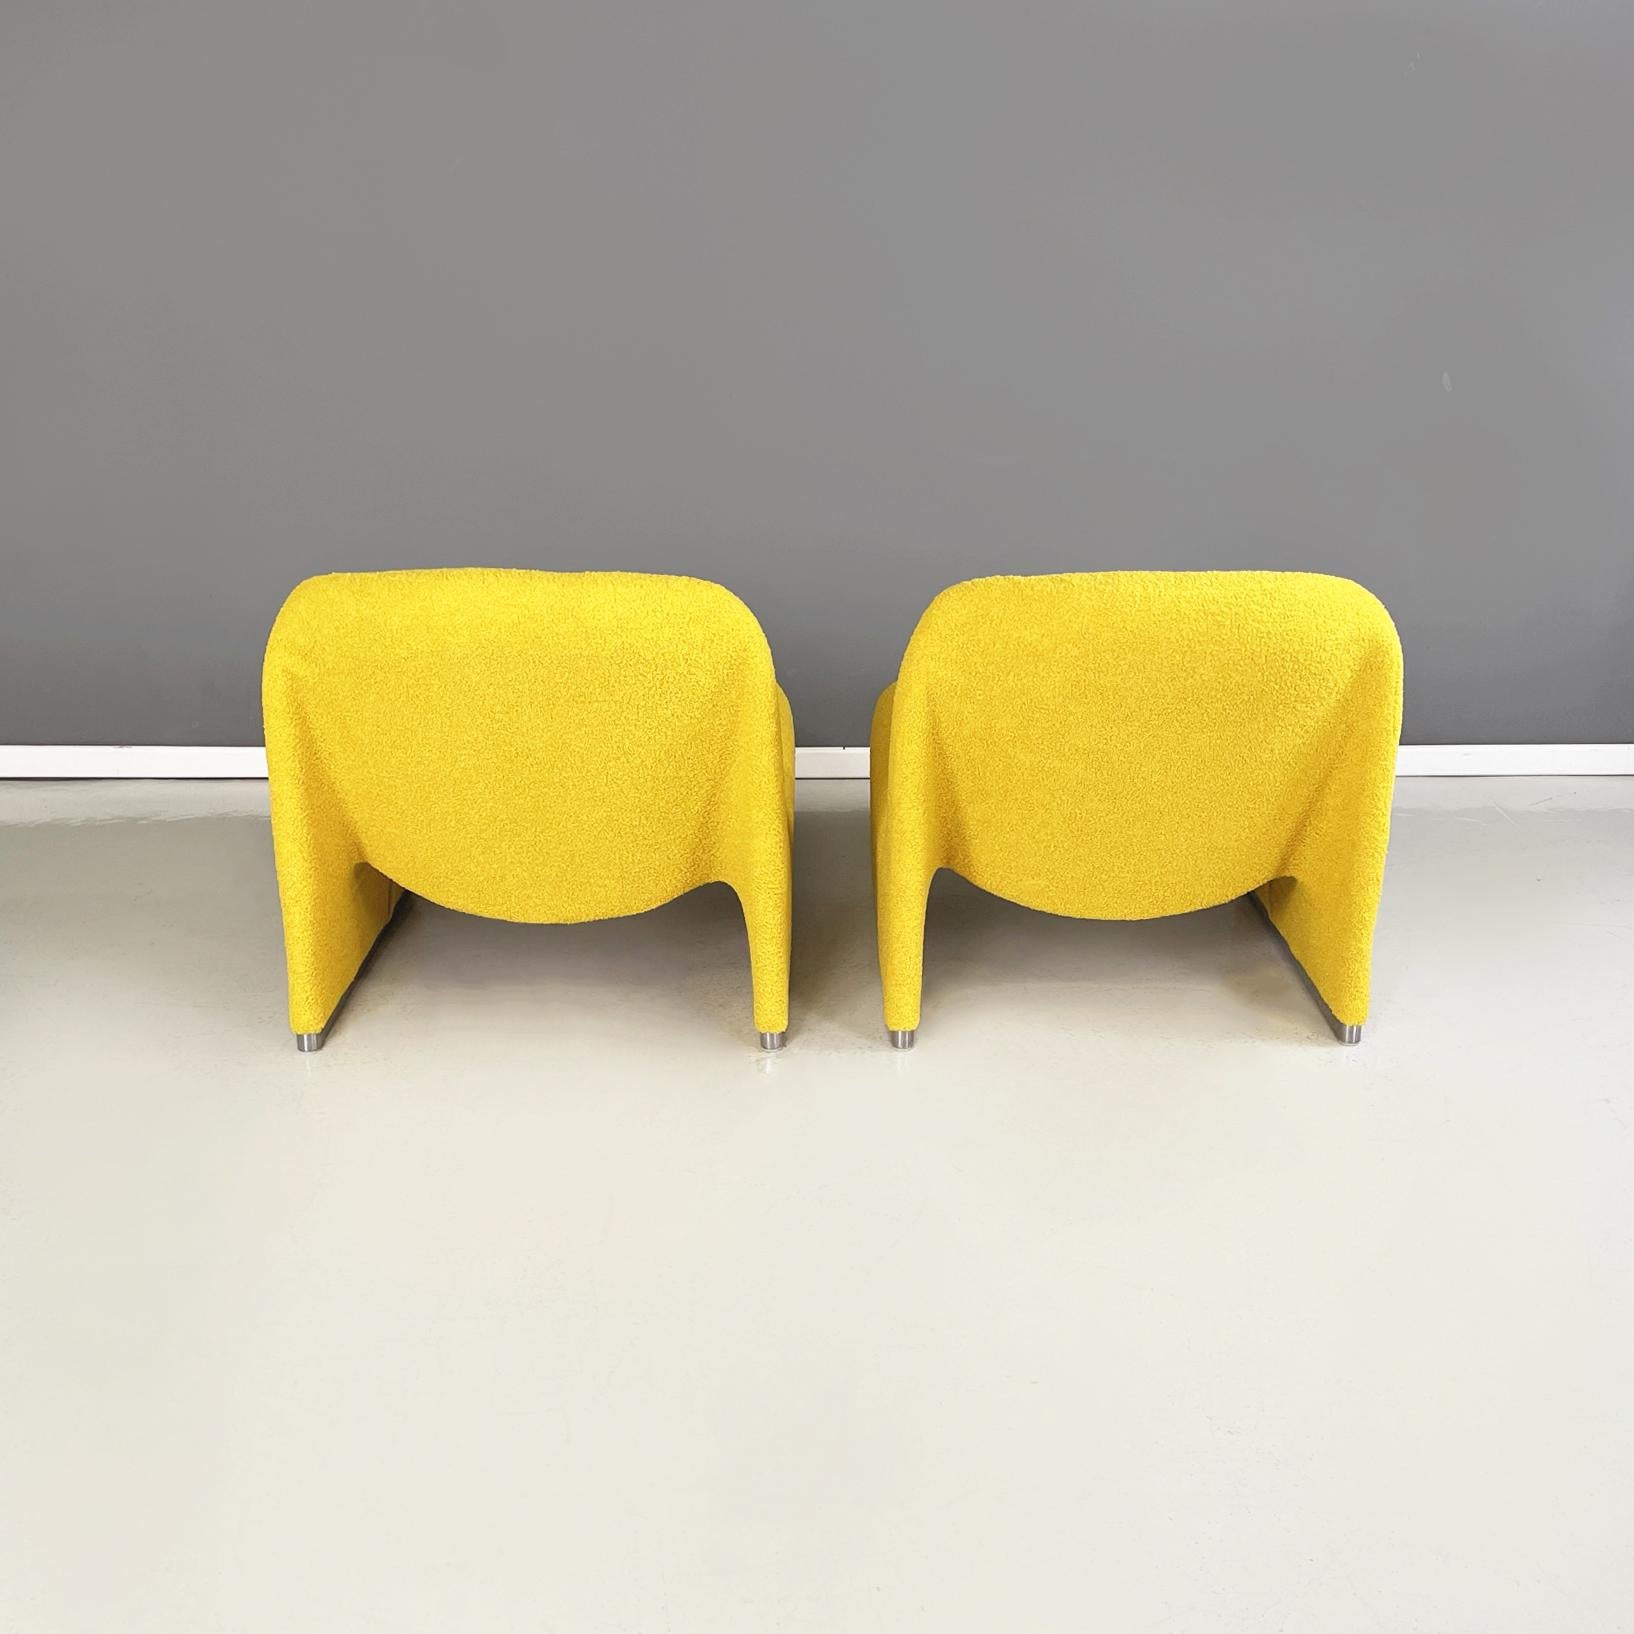 Late 20th Century Italian modern yellow fabric Armchairs Alky by Piretti for Anonima Castelli 1970 For Sale